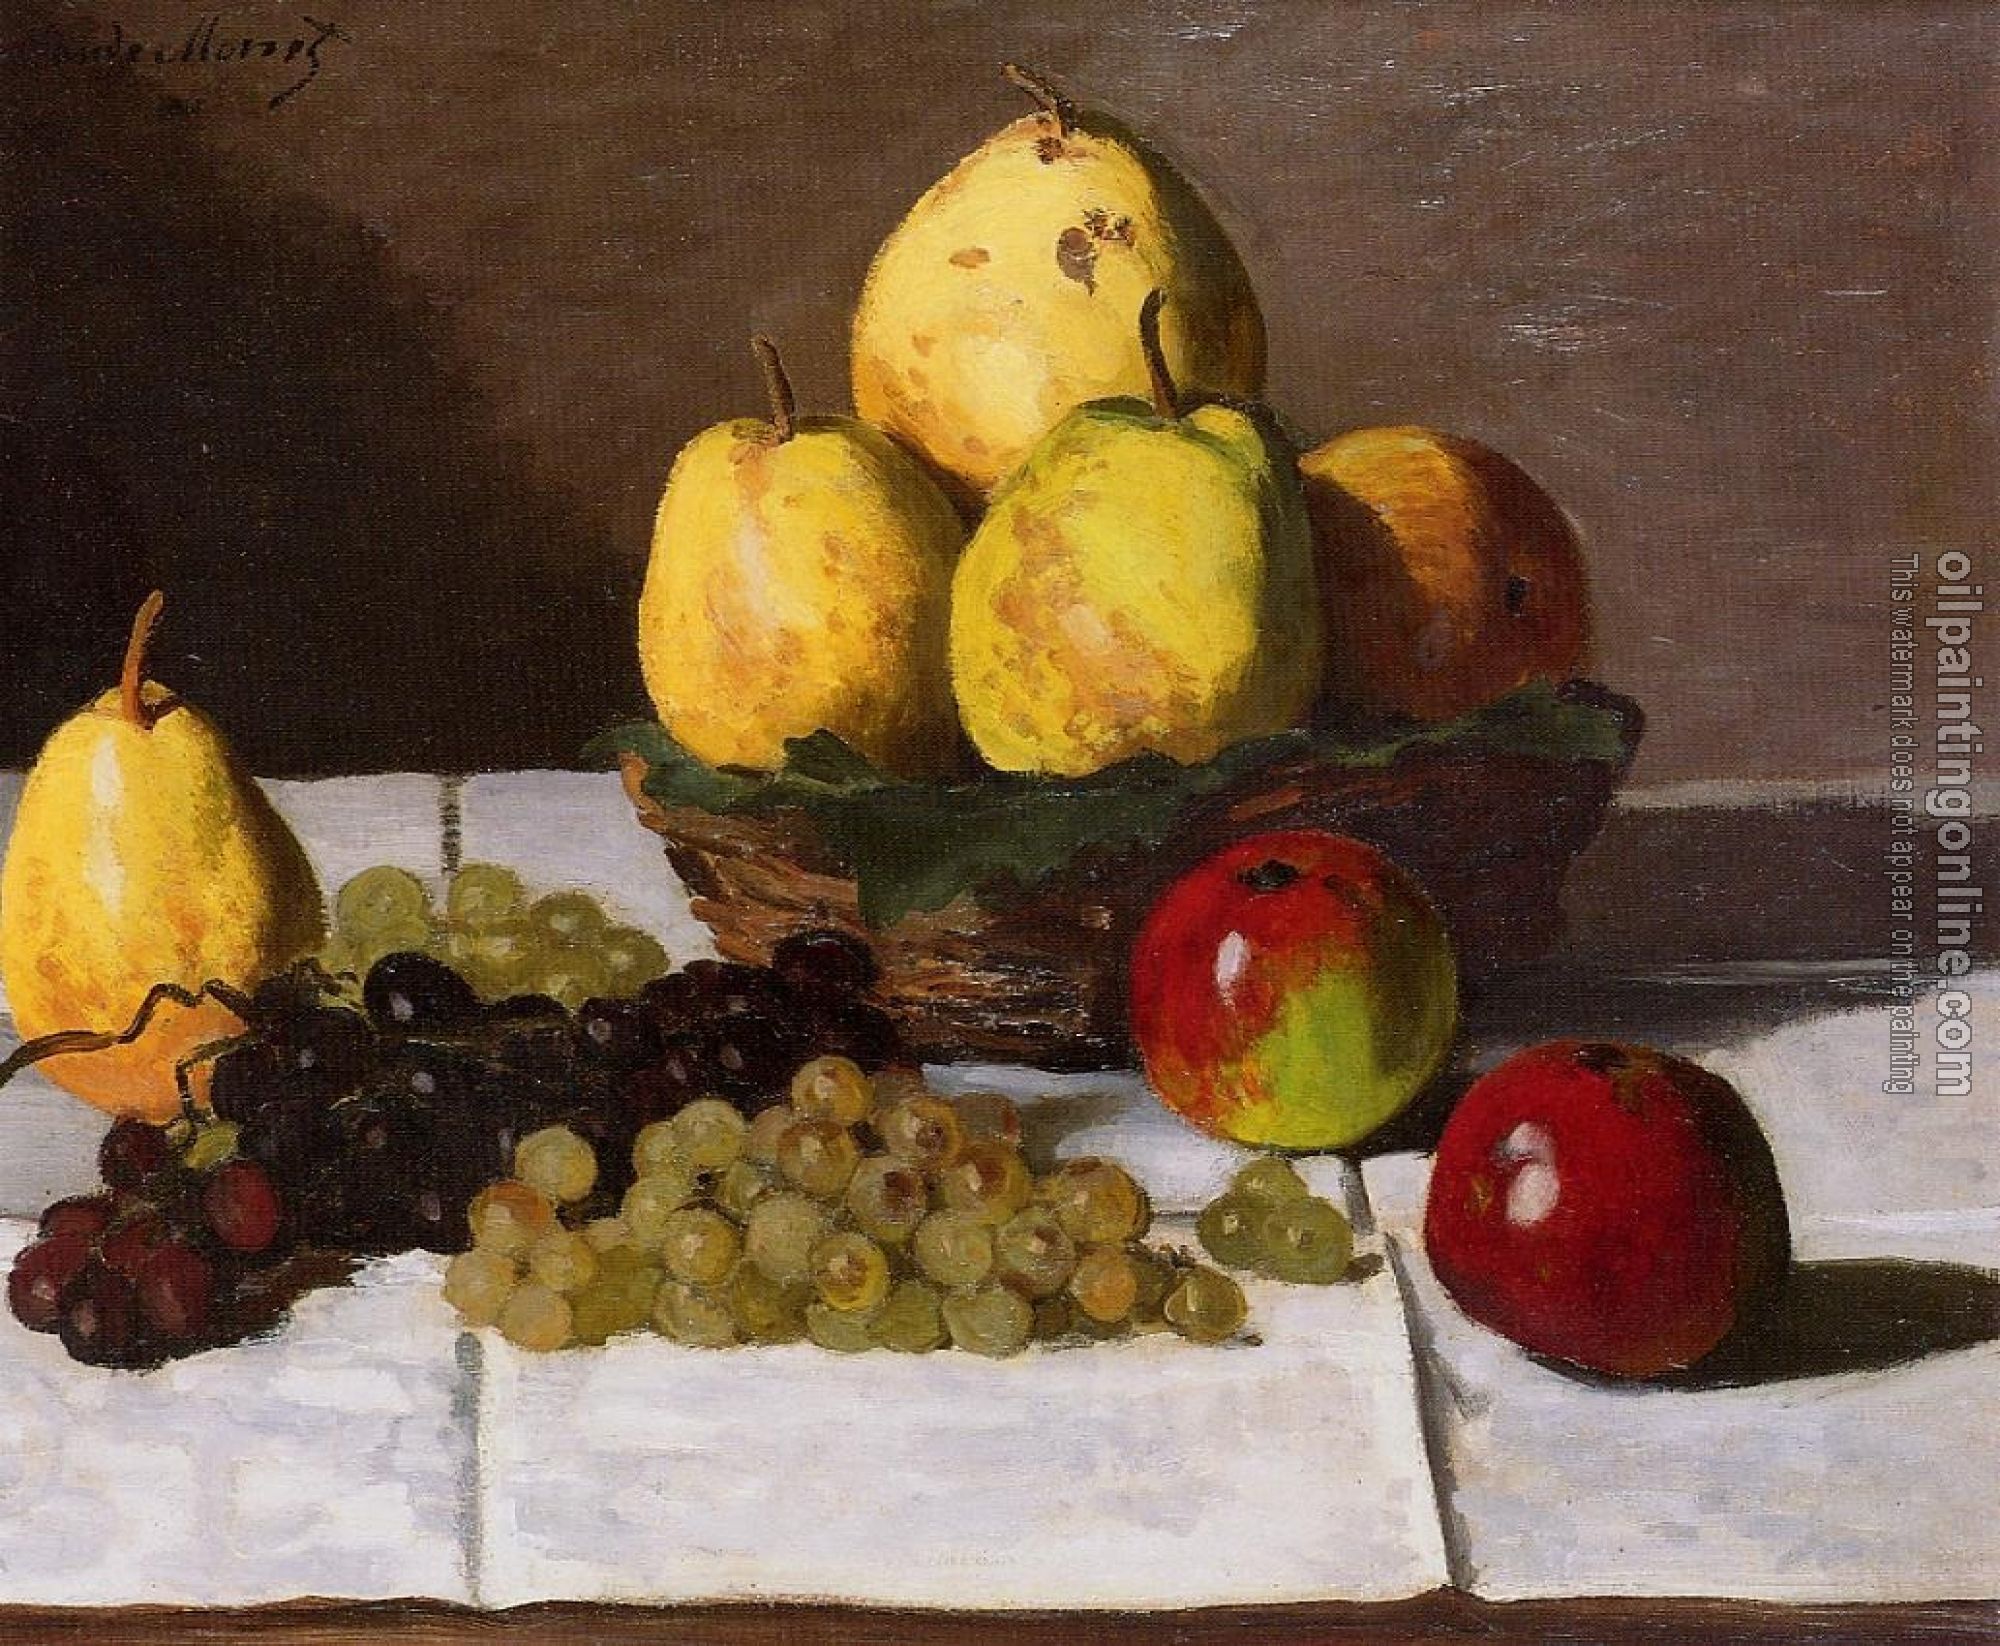 Monet, Claude Oscar - Still Life with Pears and Grapes